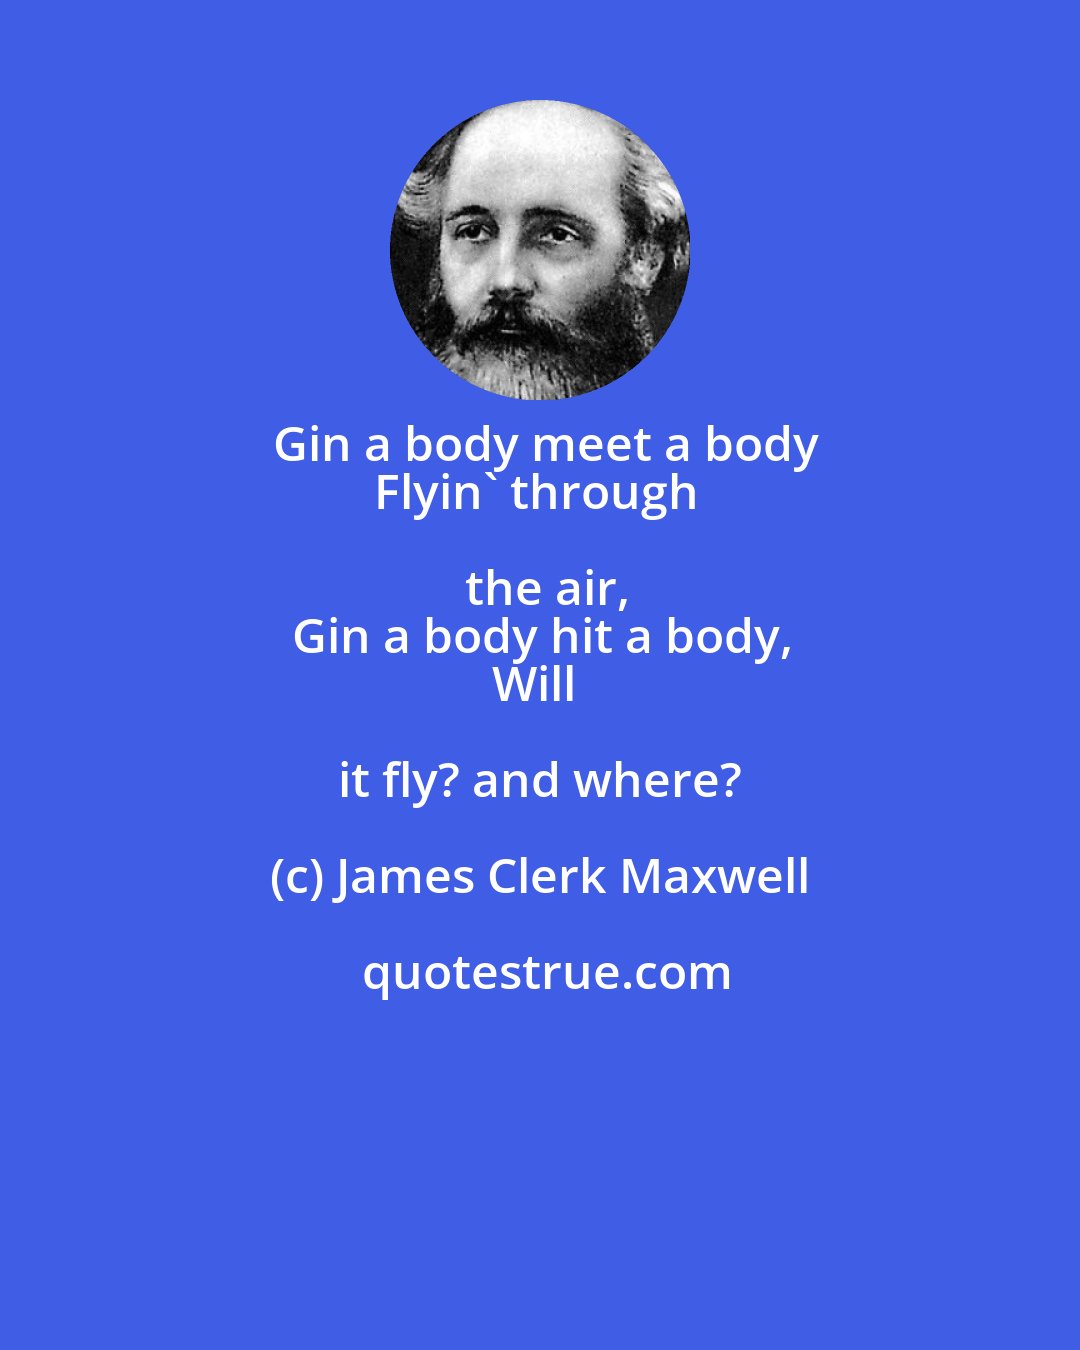 James Clerk Maxwell: Gin a body meet a body
Flyin' through the air,
Gin a body hit a body,
Will it fly? and where?